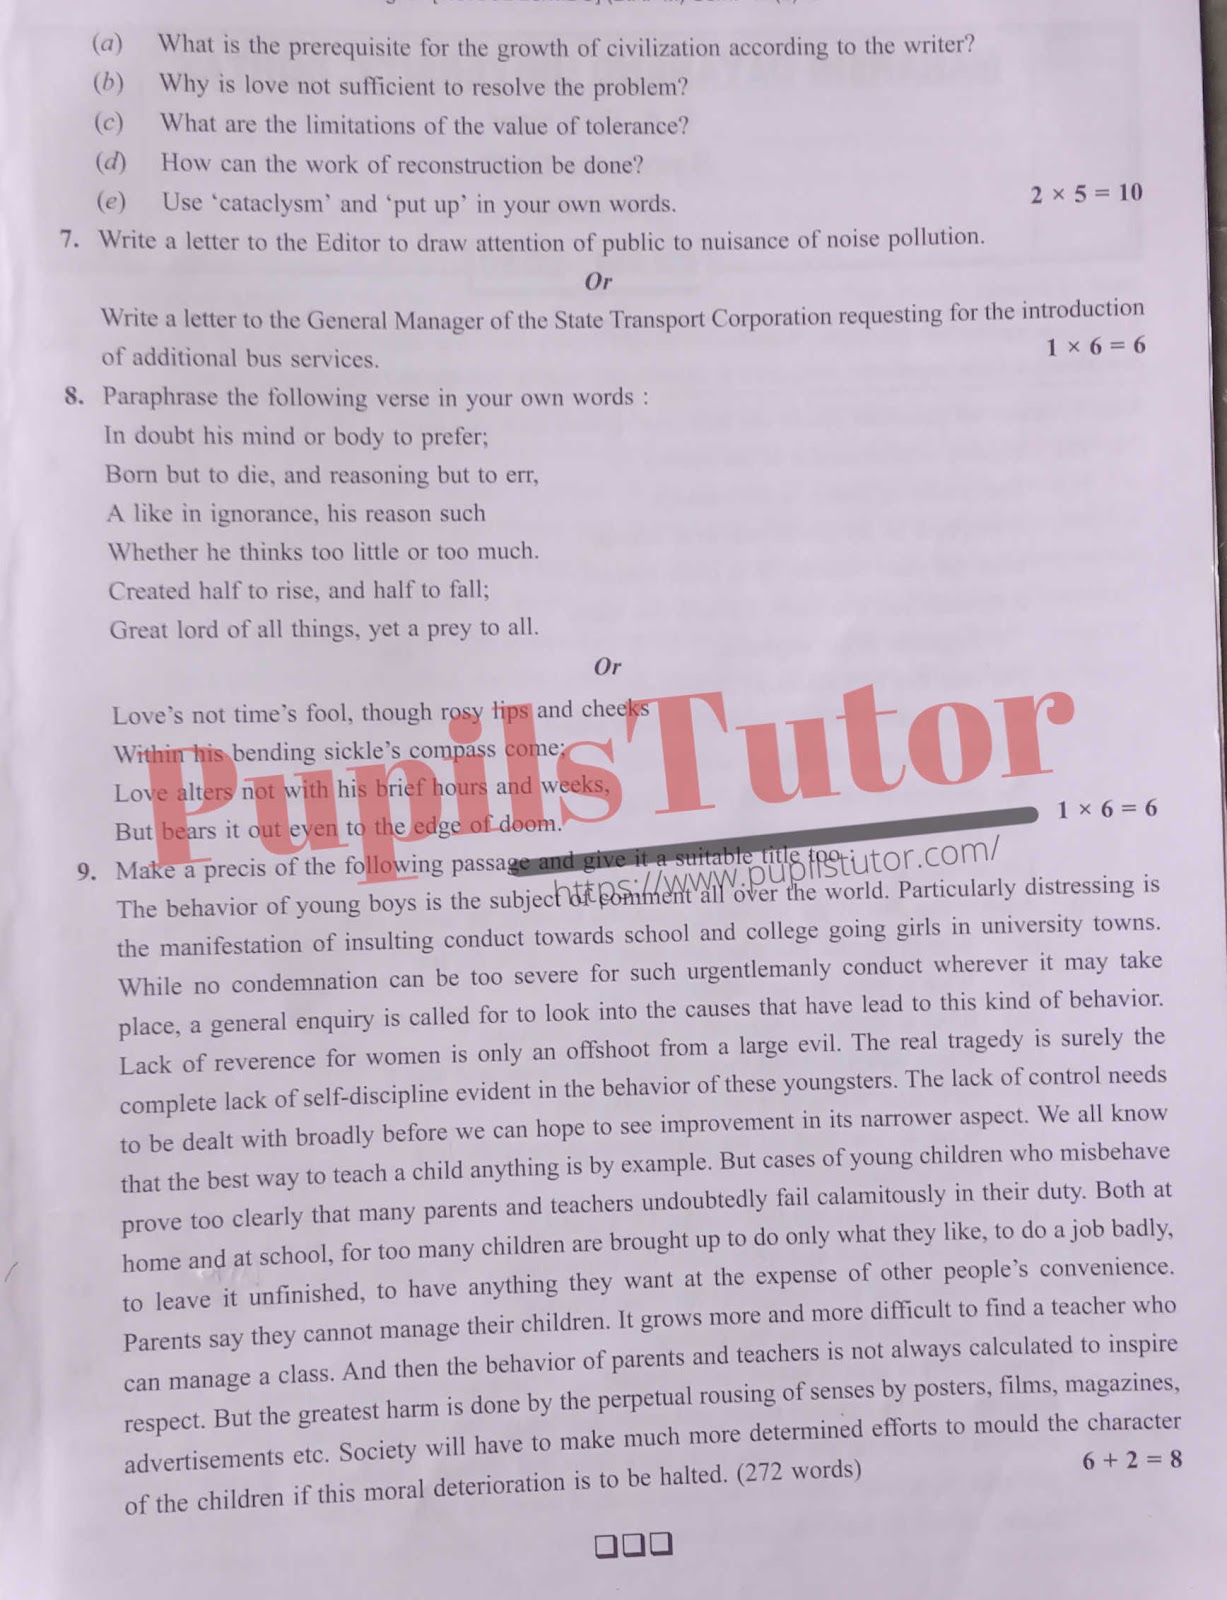 Free Download PDF Of Chaudhary Devi Lal University, Sirsa (CDLU) B.A. Sixth Semester Latest Question Paper For English Subject (Page 3) - https://www.pupilstutor.com